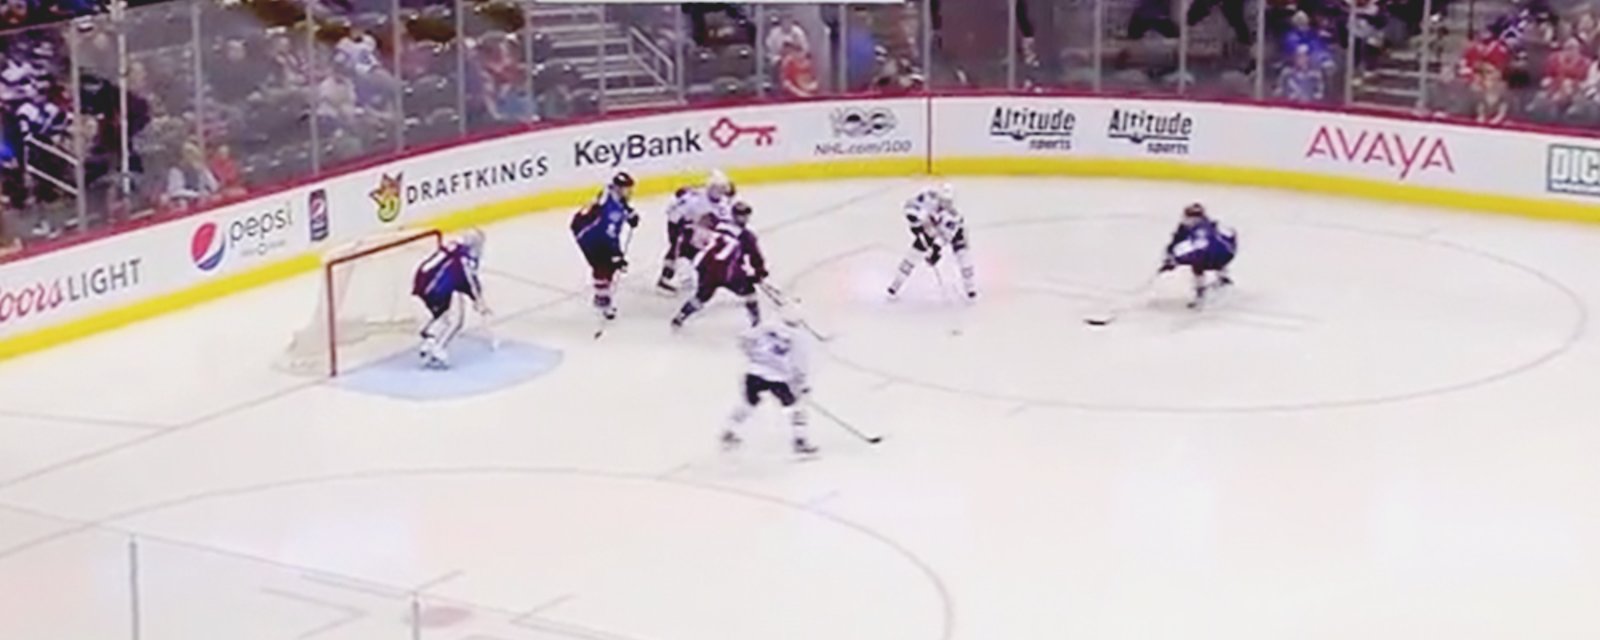 MUST SEE: Panarin's 30th goal of the season is an absolute beauty!